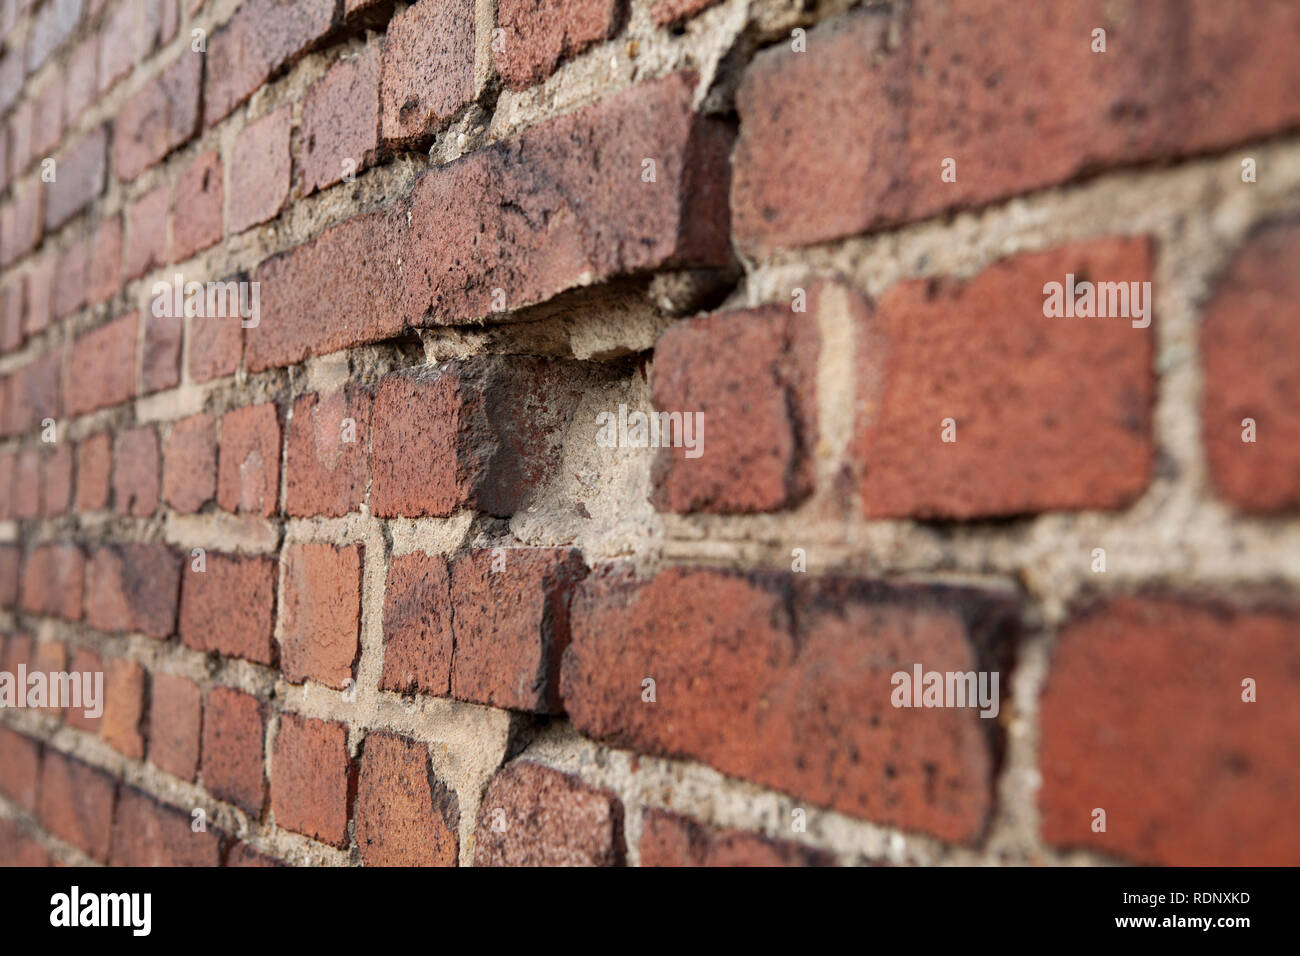 File:Don't Be Another Brick In The Wall (40820885050).jpg - Wikimedia  Commons